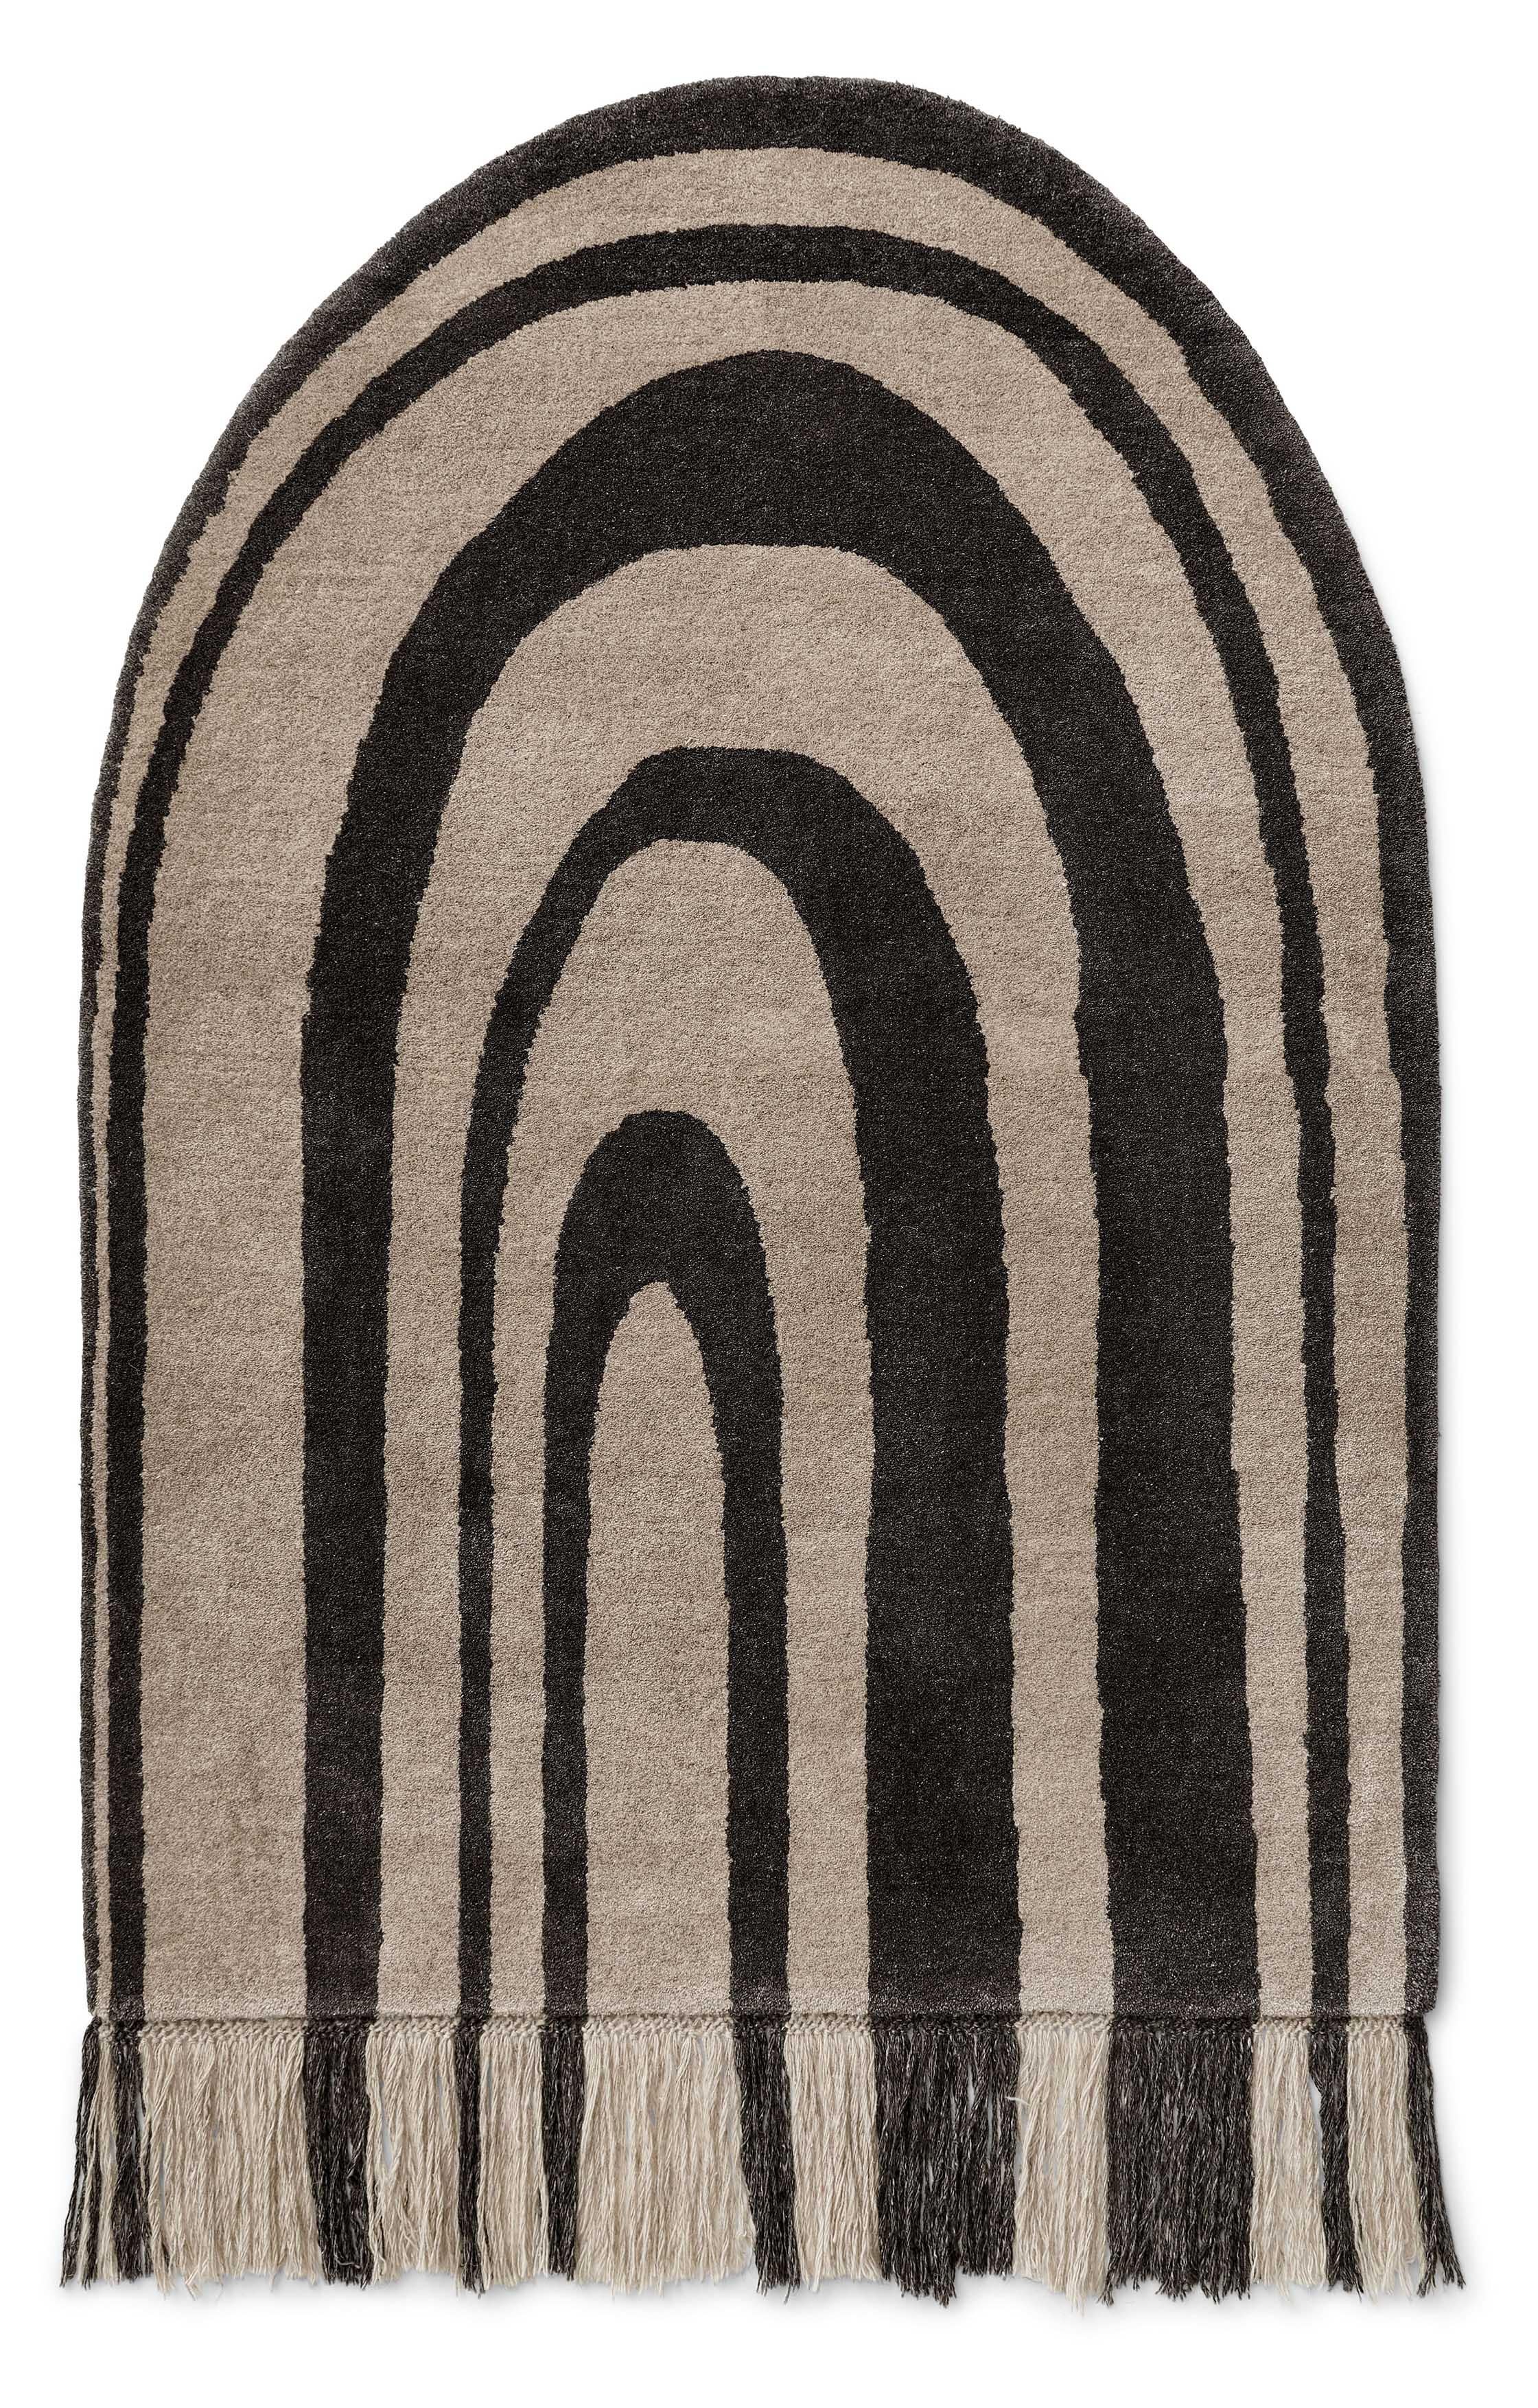 No.05 Rug by Cappelen Dimyr
Dimensions: D120 x H180 cm
Materials: 85% wool 15% cotton

no.06 is a continuation of the iconic no.01 in a limited and luxe edition. The soft low pile has been hand knotted by the craftsmen with approximately 90